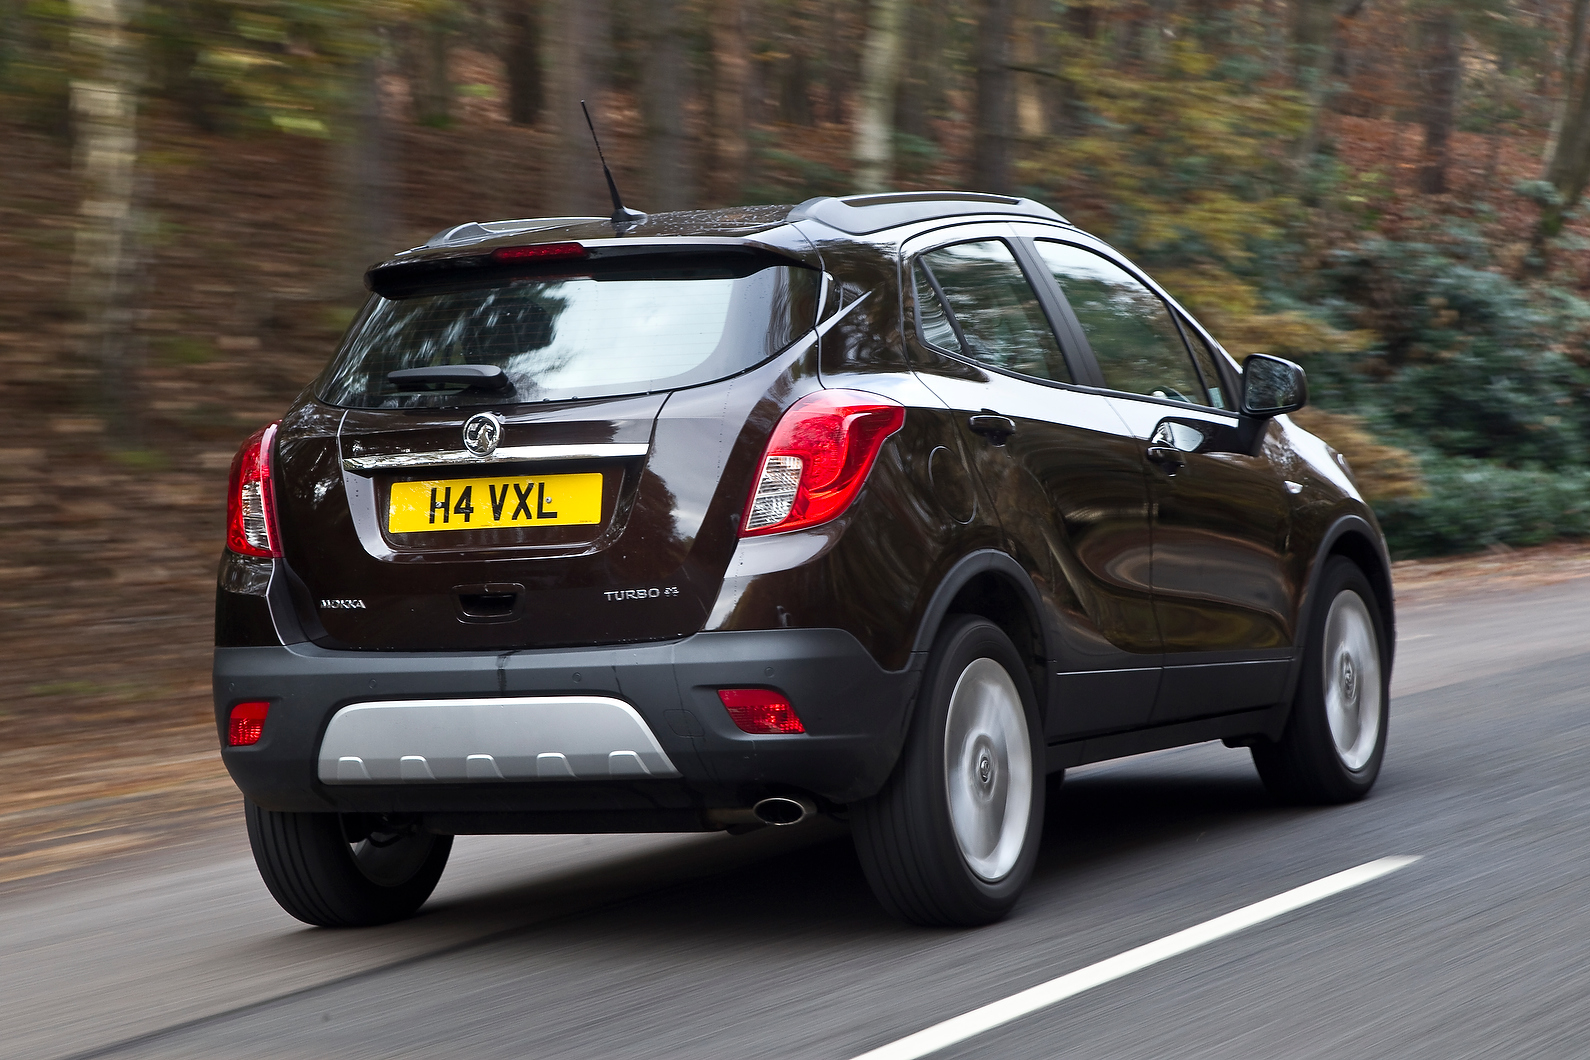 The Vauxhall Mokka 1.4T's torque is limited by its ECU